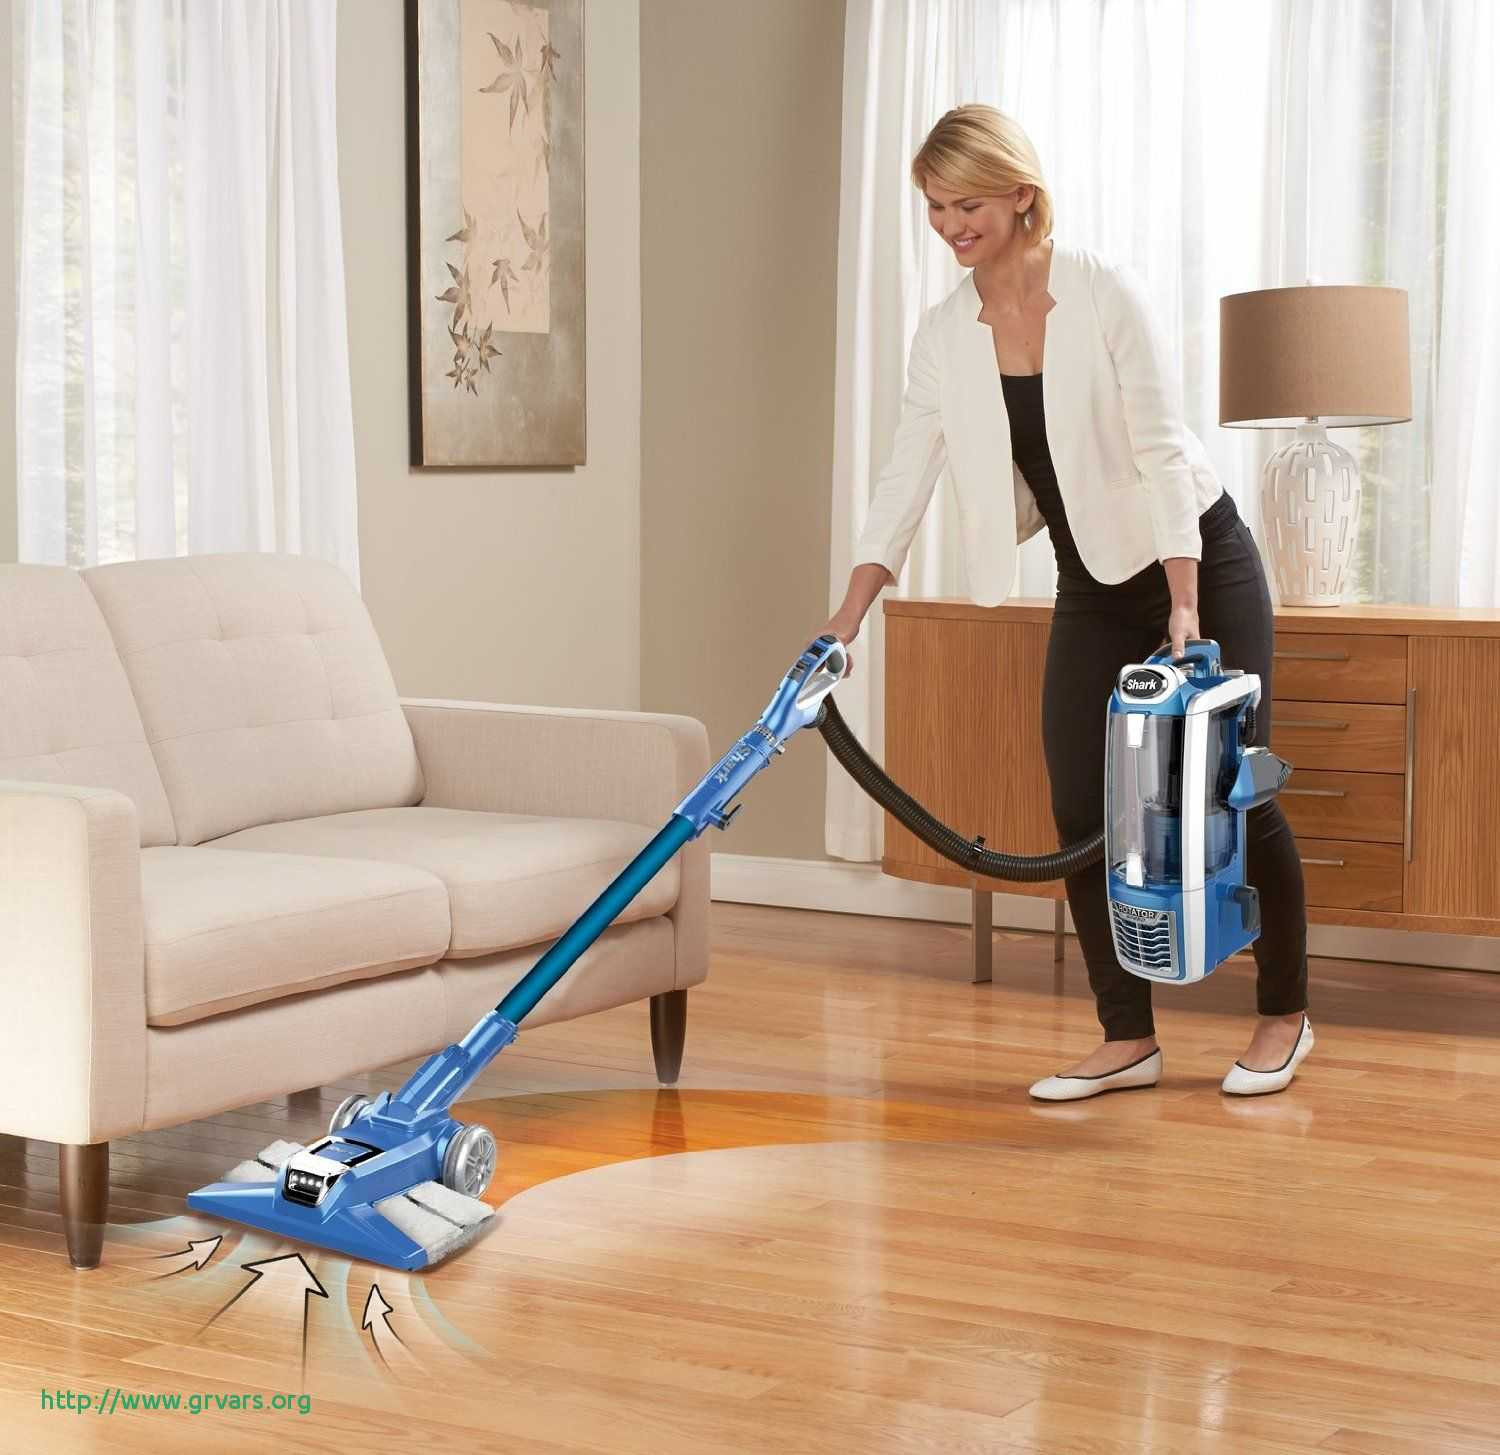 12 Ideal Miele Vacuum Cleaner for Hardwood Floors 2024 free download miele vacuum cleaner for hardwood floors of 24 ac289lagant hoover for laminate floor ideas blog pertaining to shark rotator powered lift away speed nv683 oring